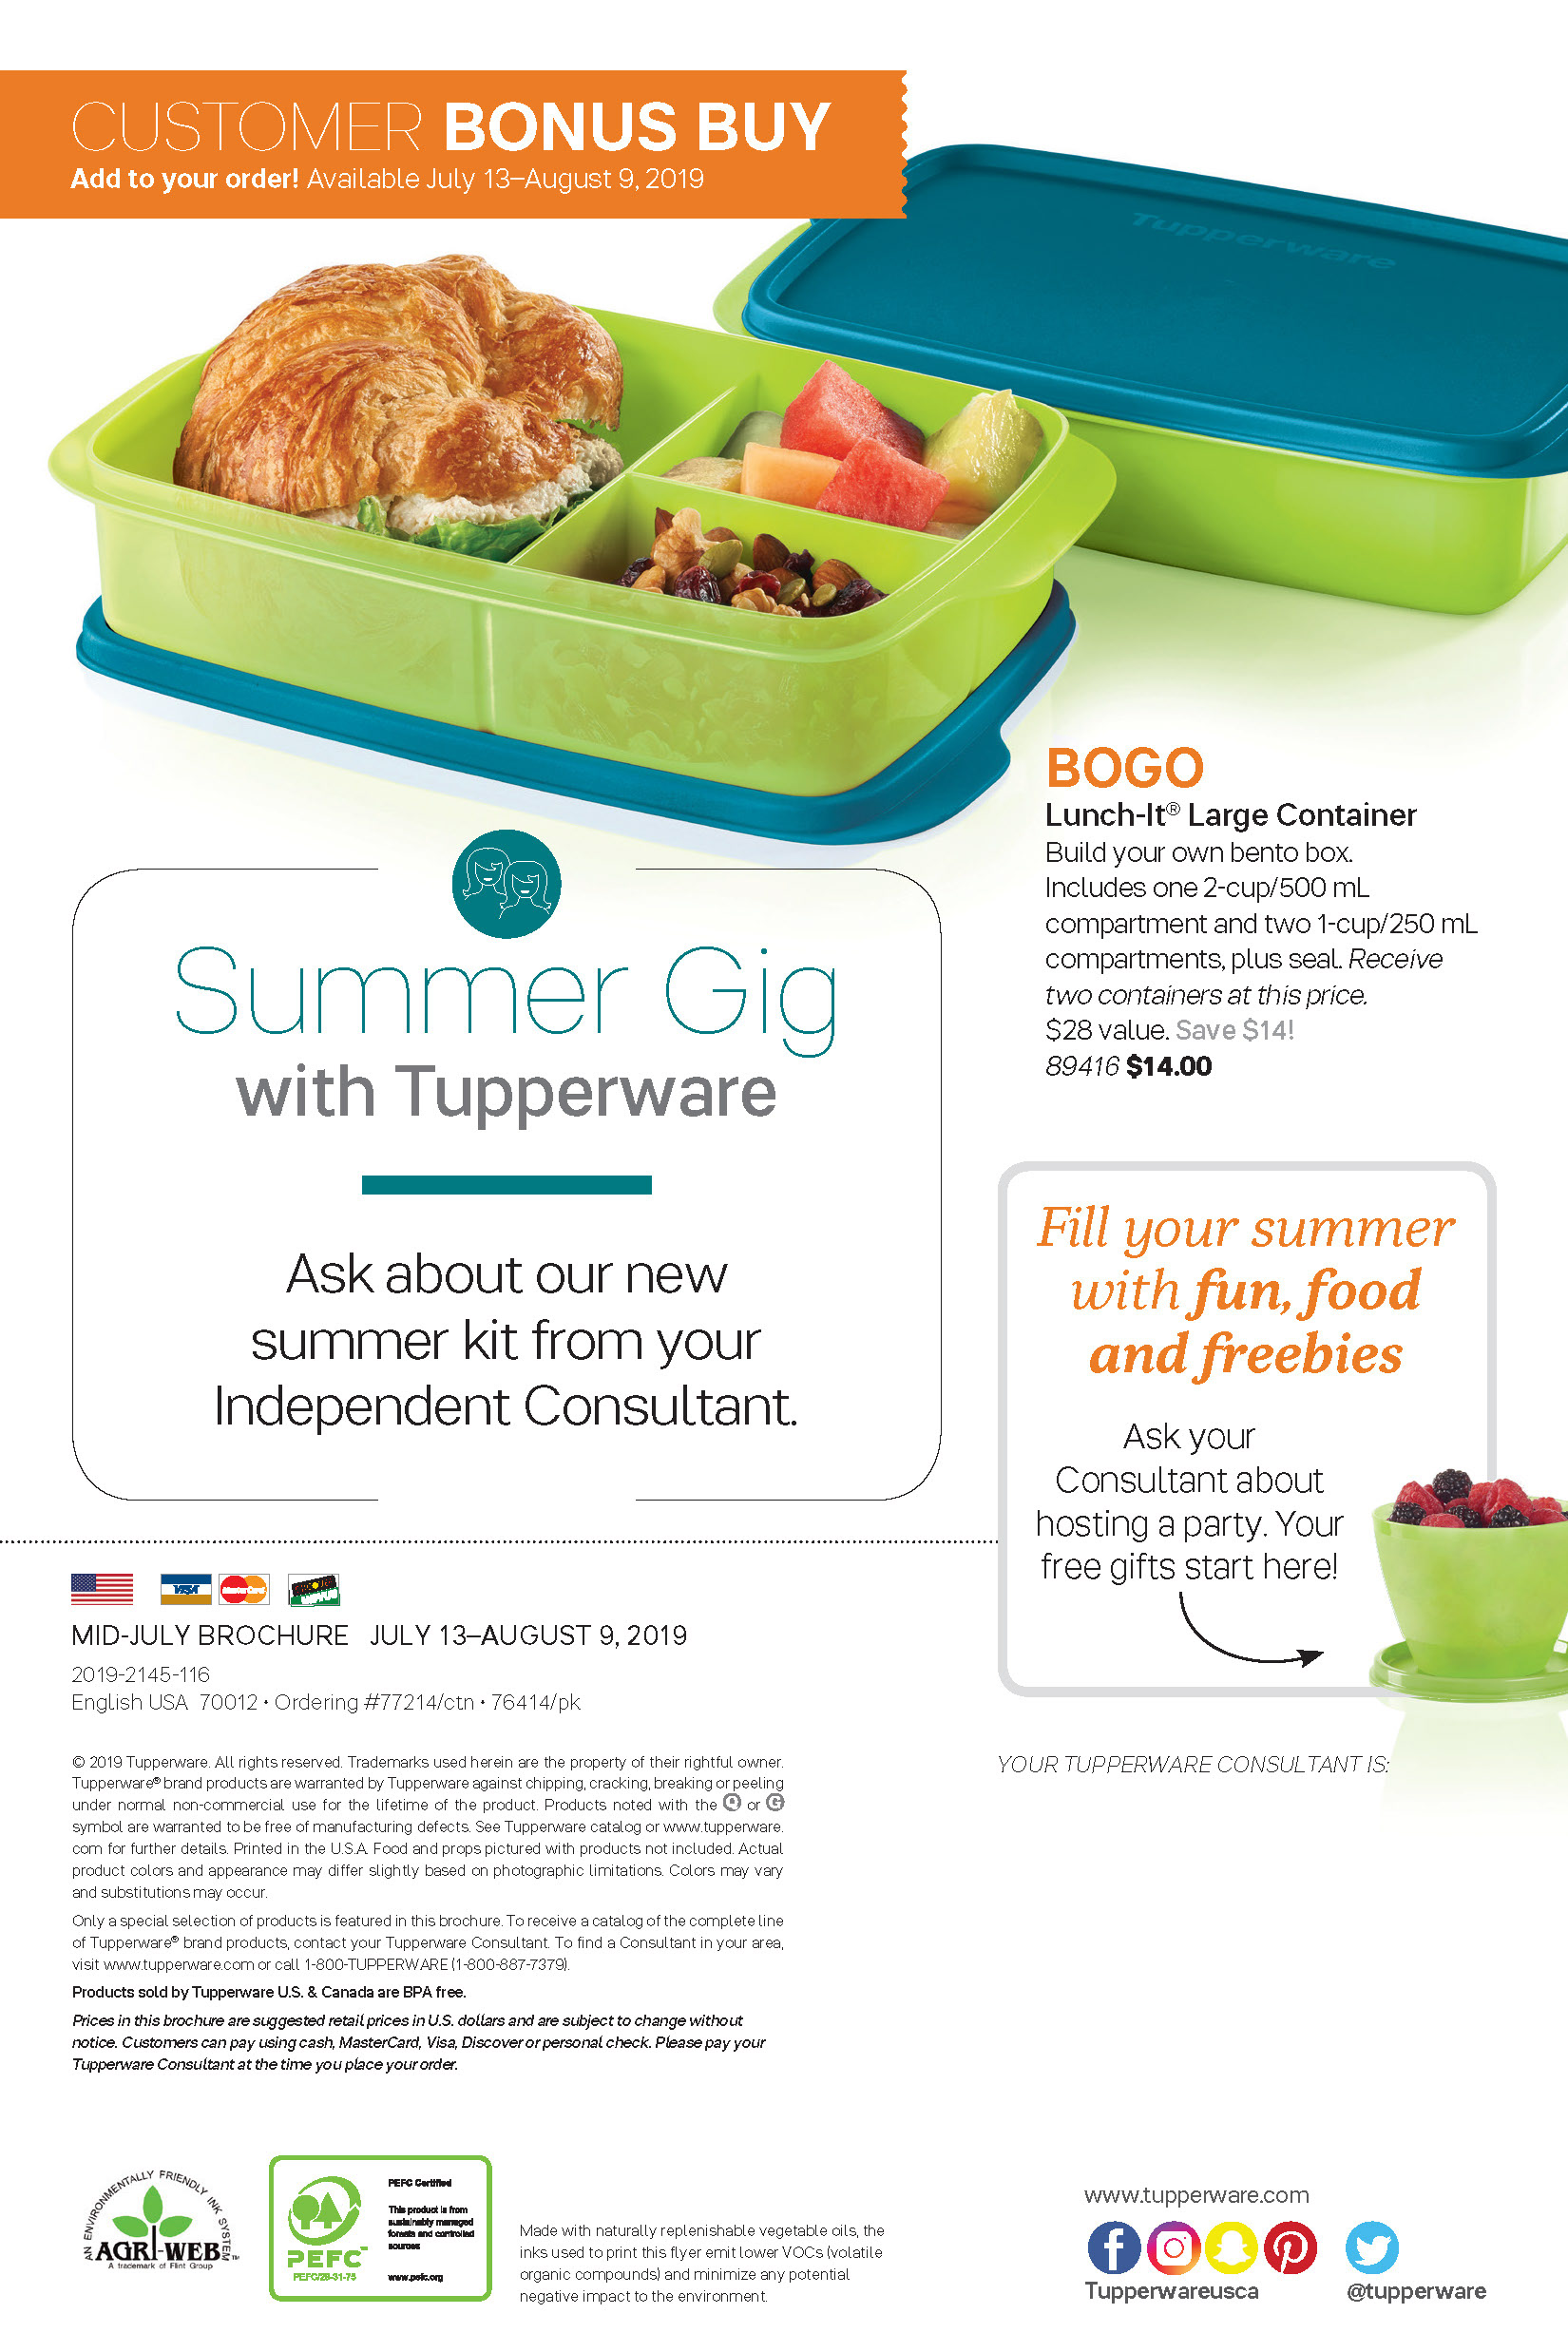 Tupperware Lunch It Containers Recipes by TupperwareRecipes - Issuu